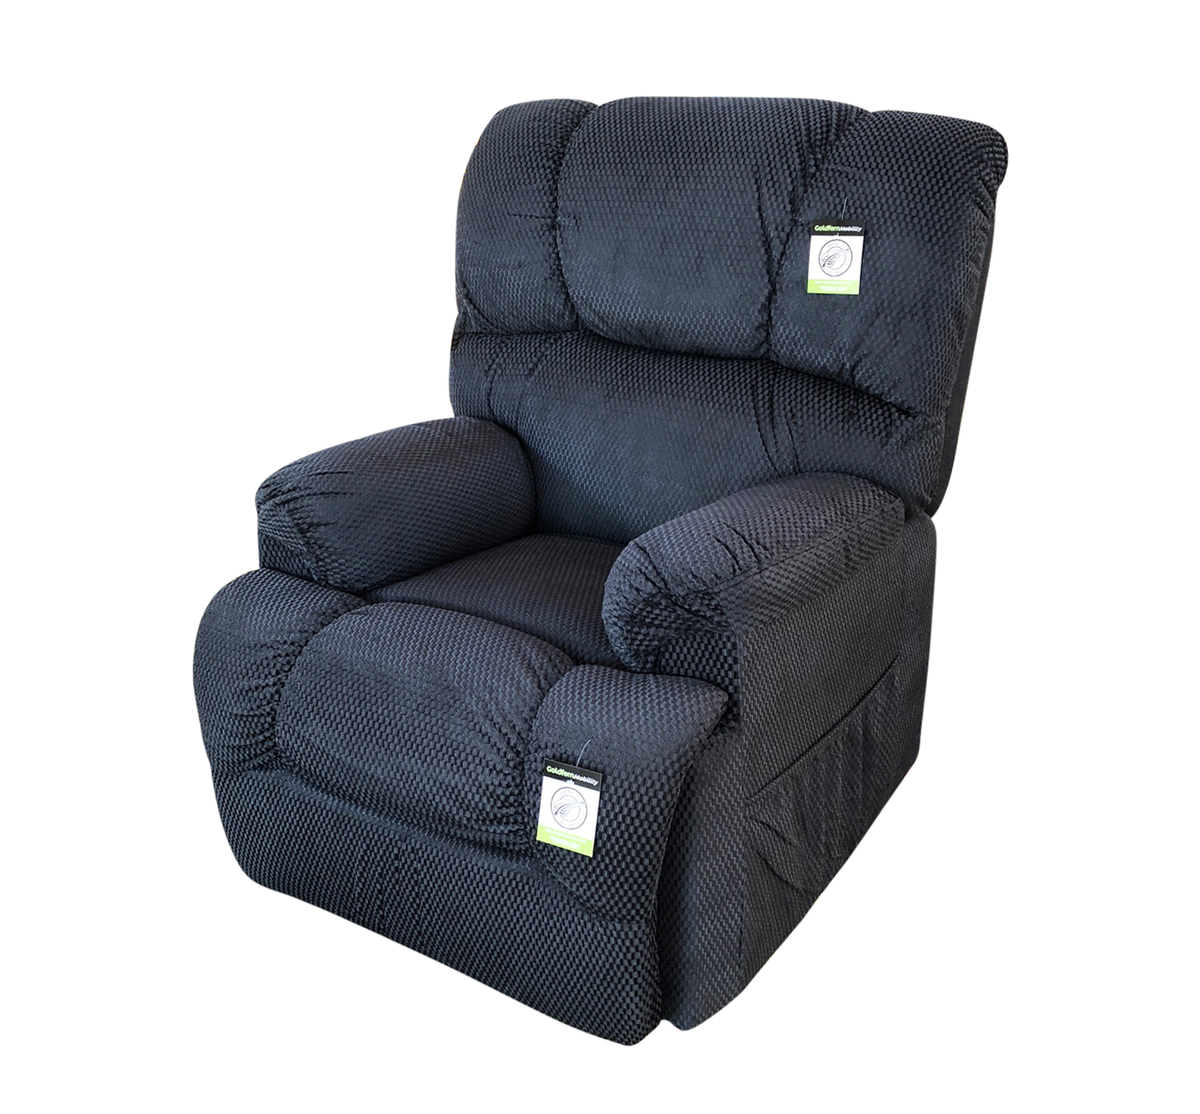 Lift Chair Electric Dual Motor